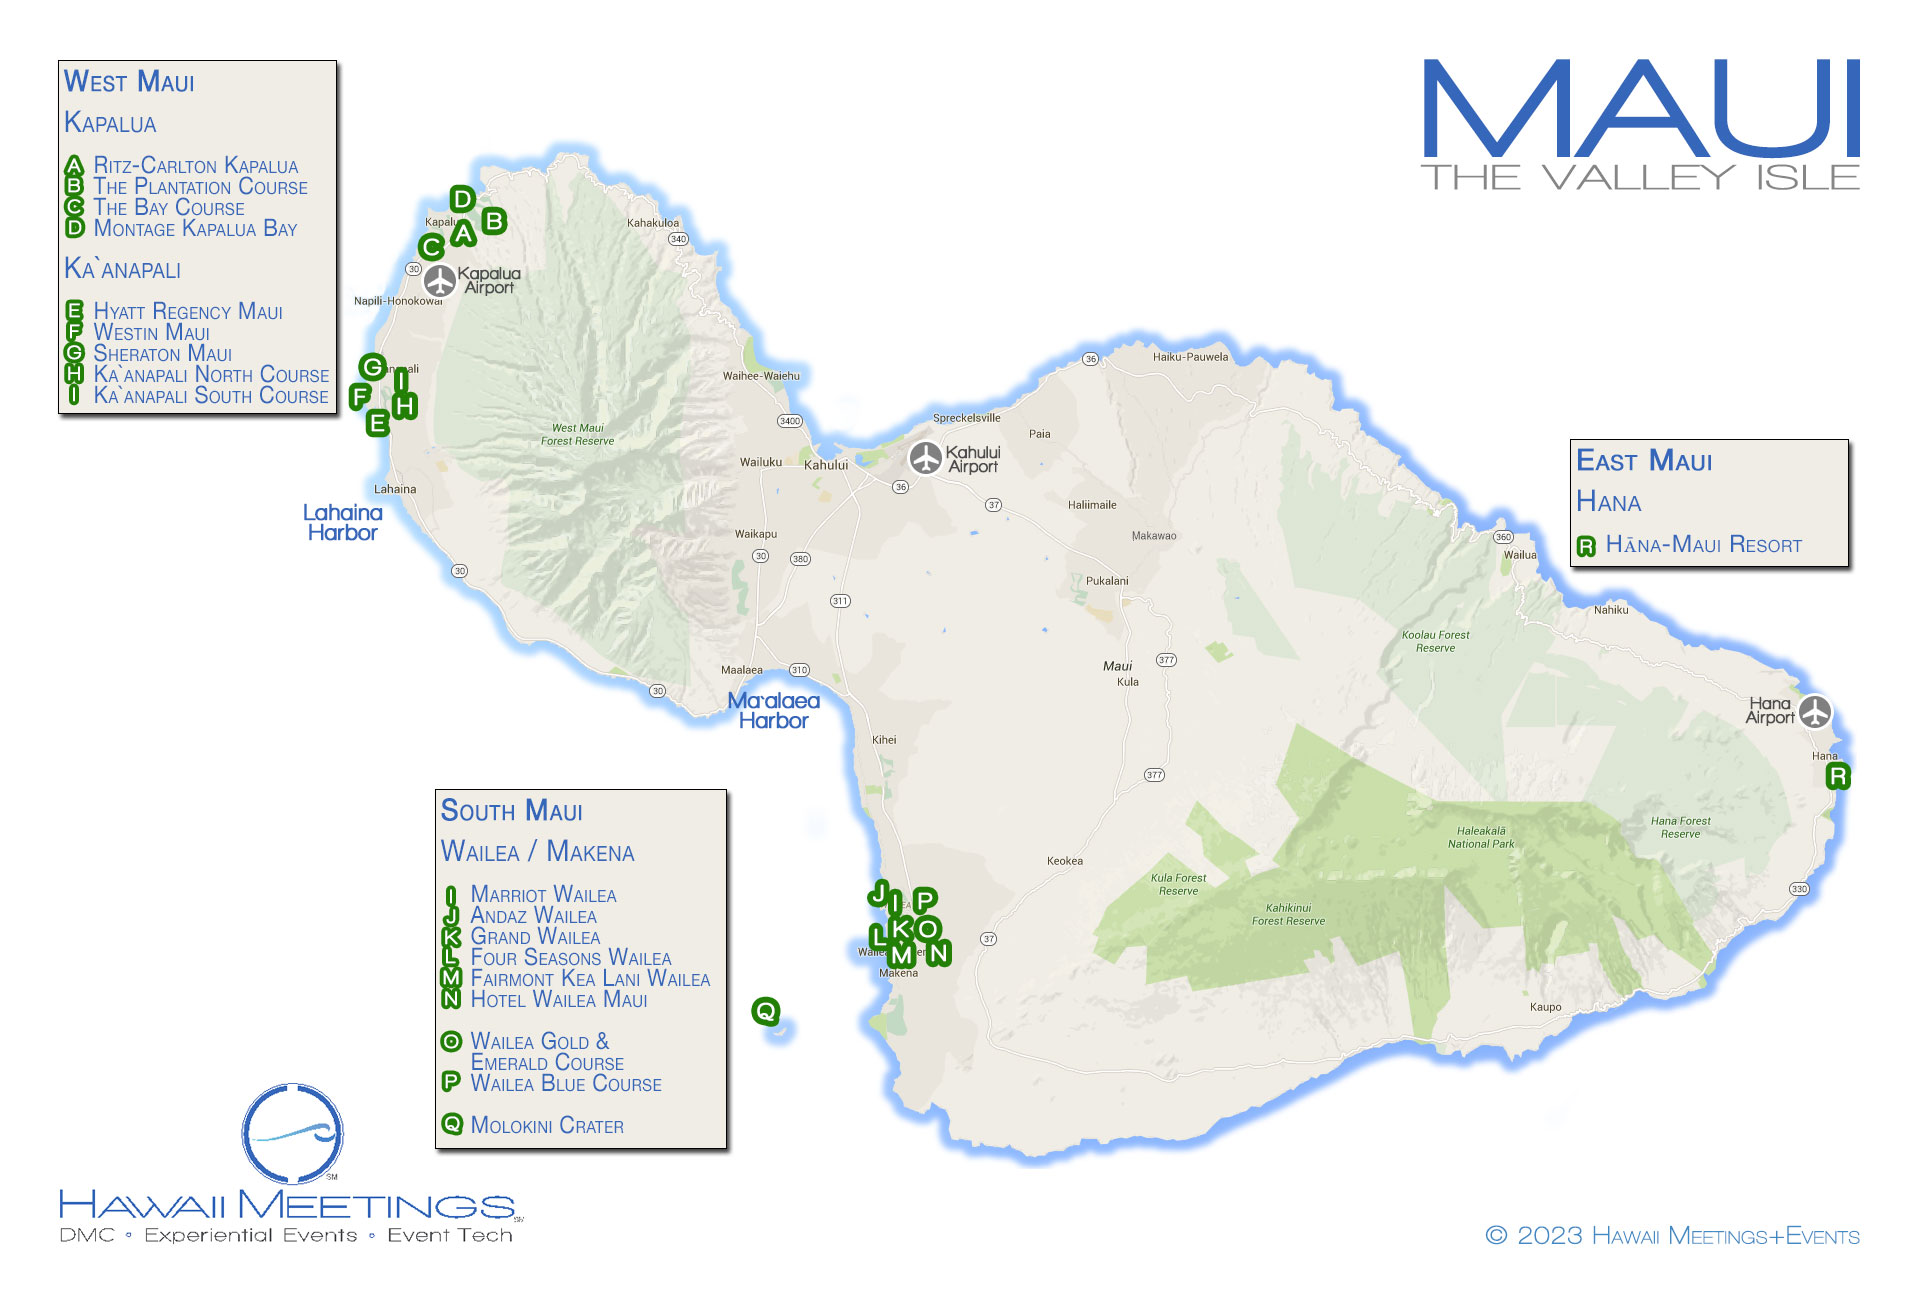 This map highlights Maui's many meeting and incentive property locations.